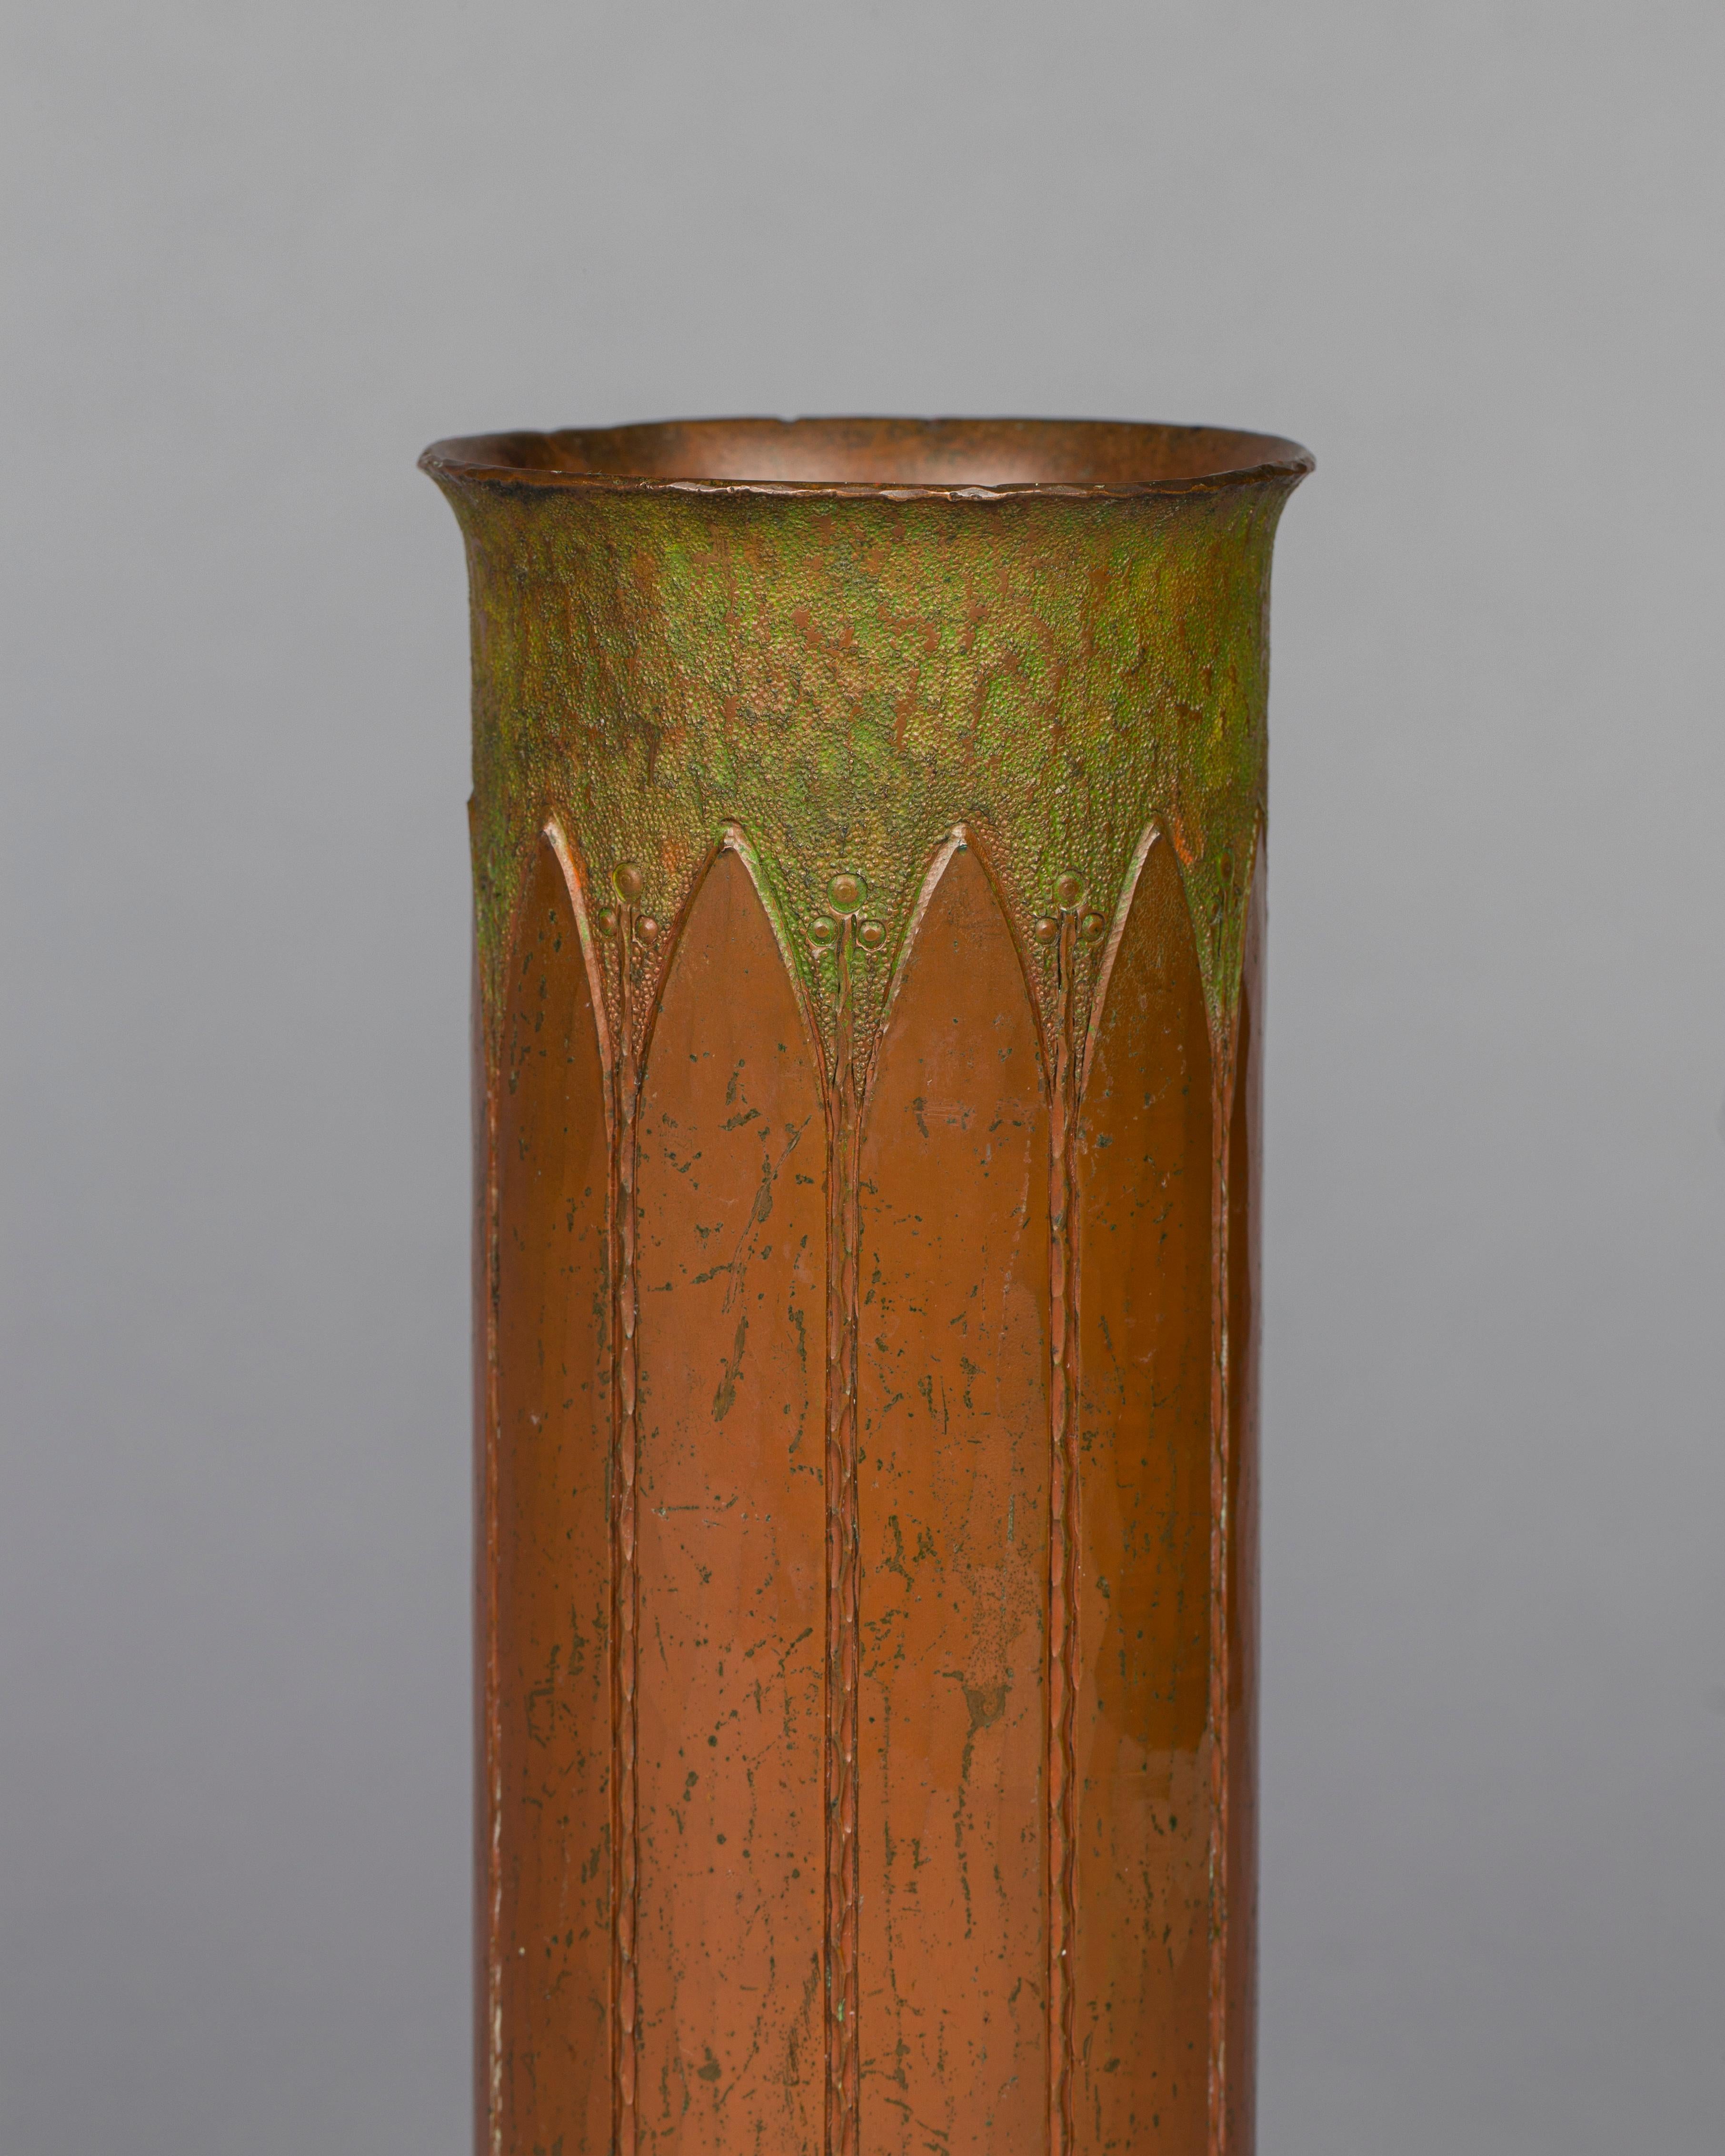 Roycroft
Rare hammered copper cylindrical vase incised with full-length leaves alternating with
buds beneath a verdigris-patinated hammered top, circa 1910-1915
Design by Walter Jennings
Orb and cross mark.